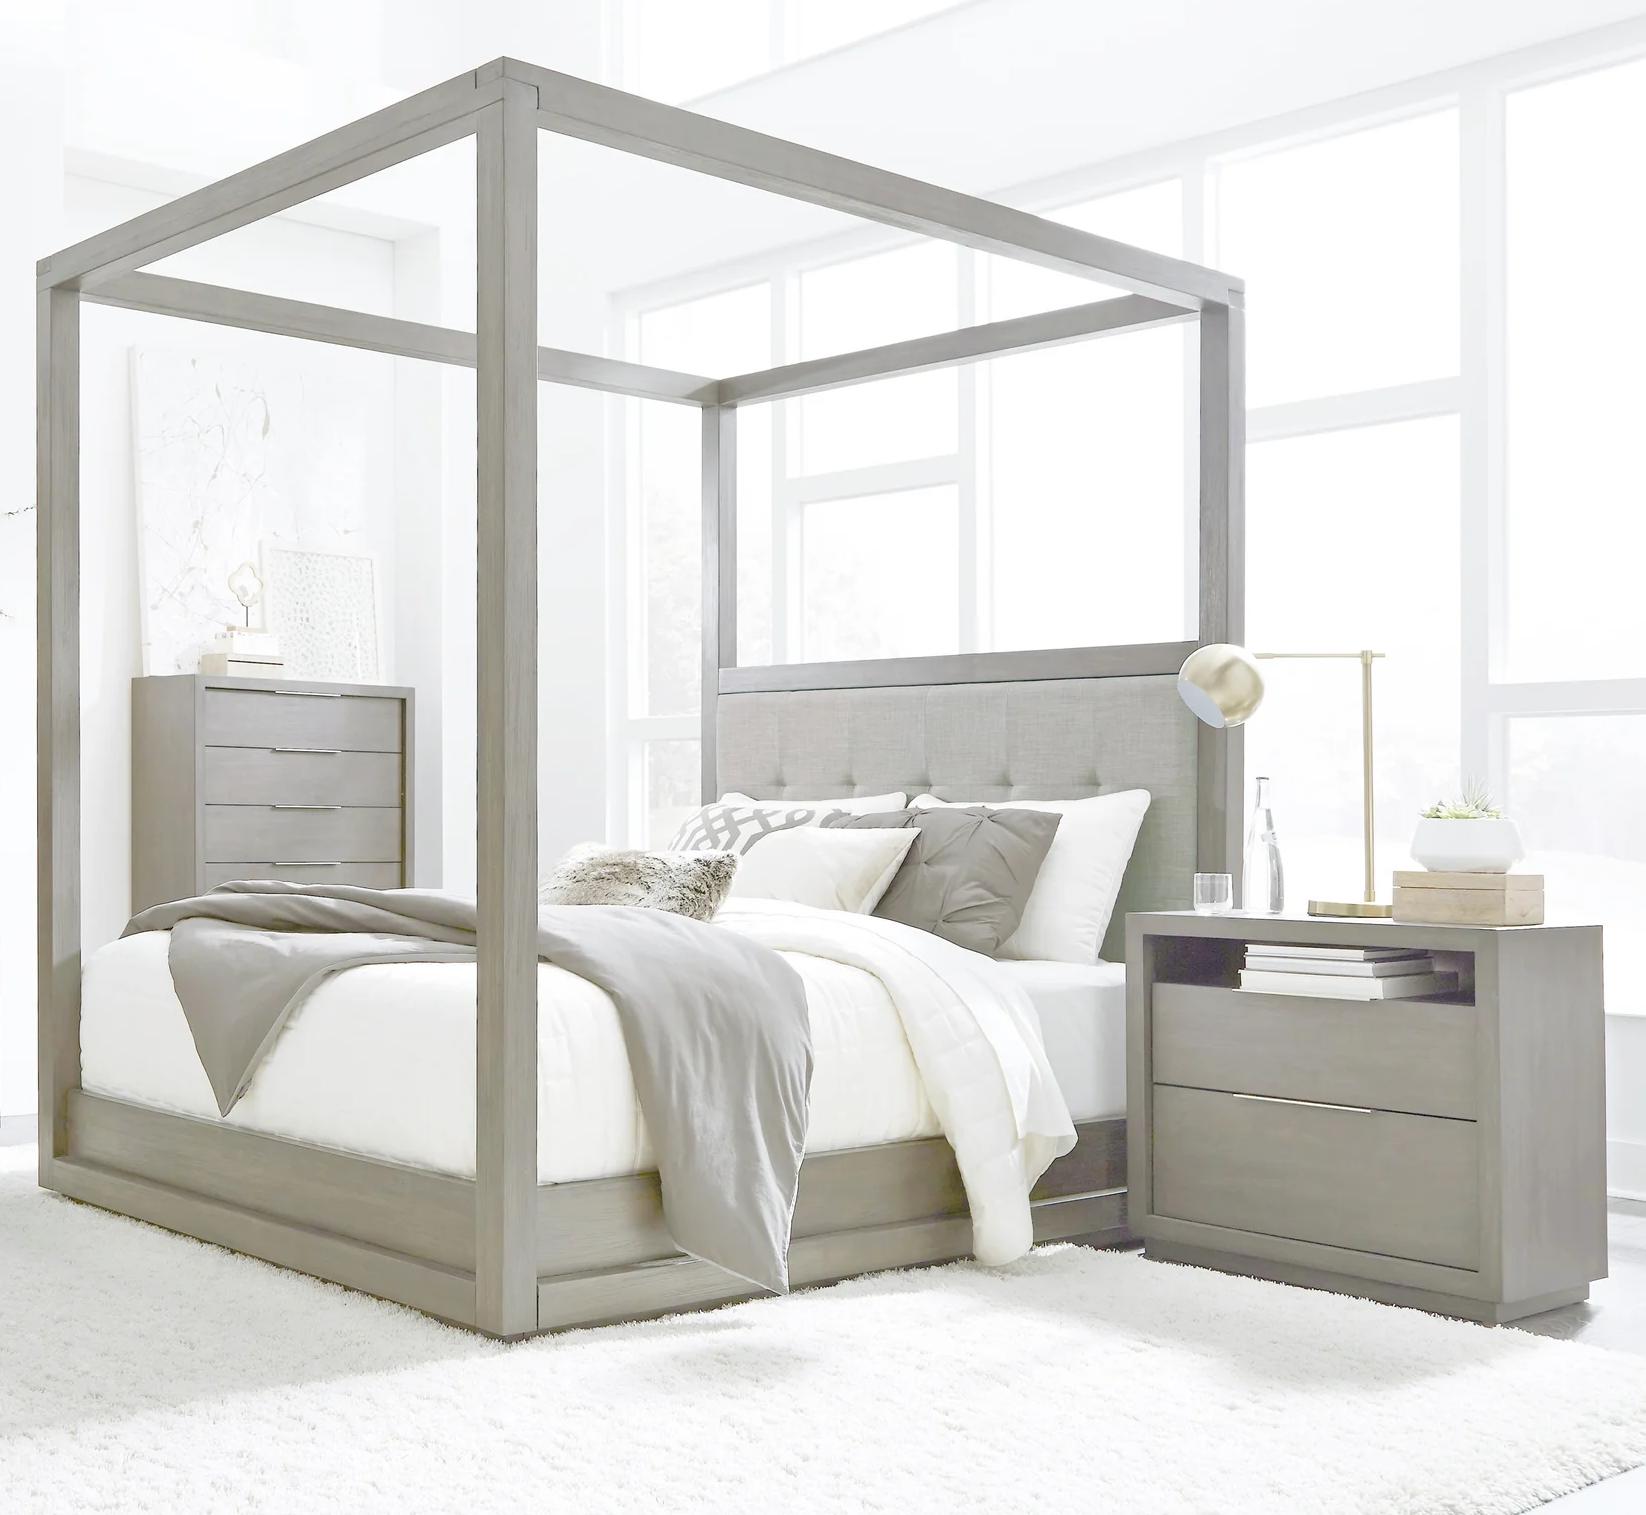 Contemporary Canopy Bedroom Set OXFORD CANOPY AZBXH7-2N-3PC in Light Gray, Stone Fabric